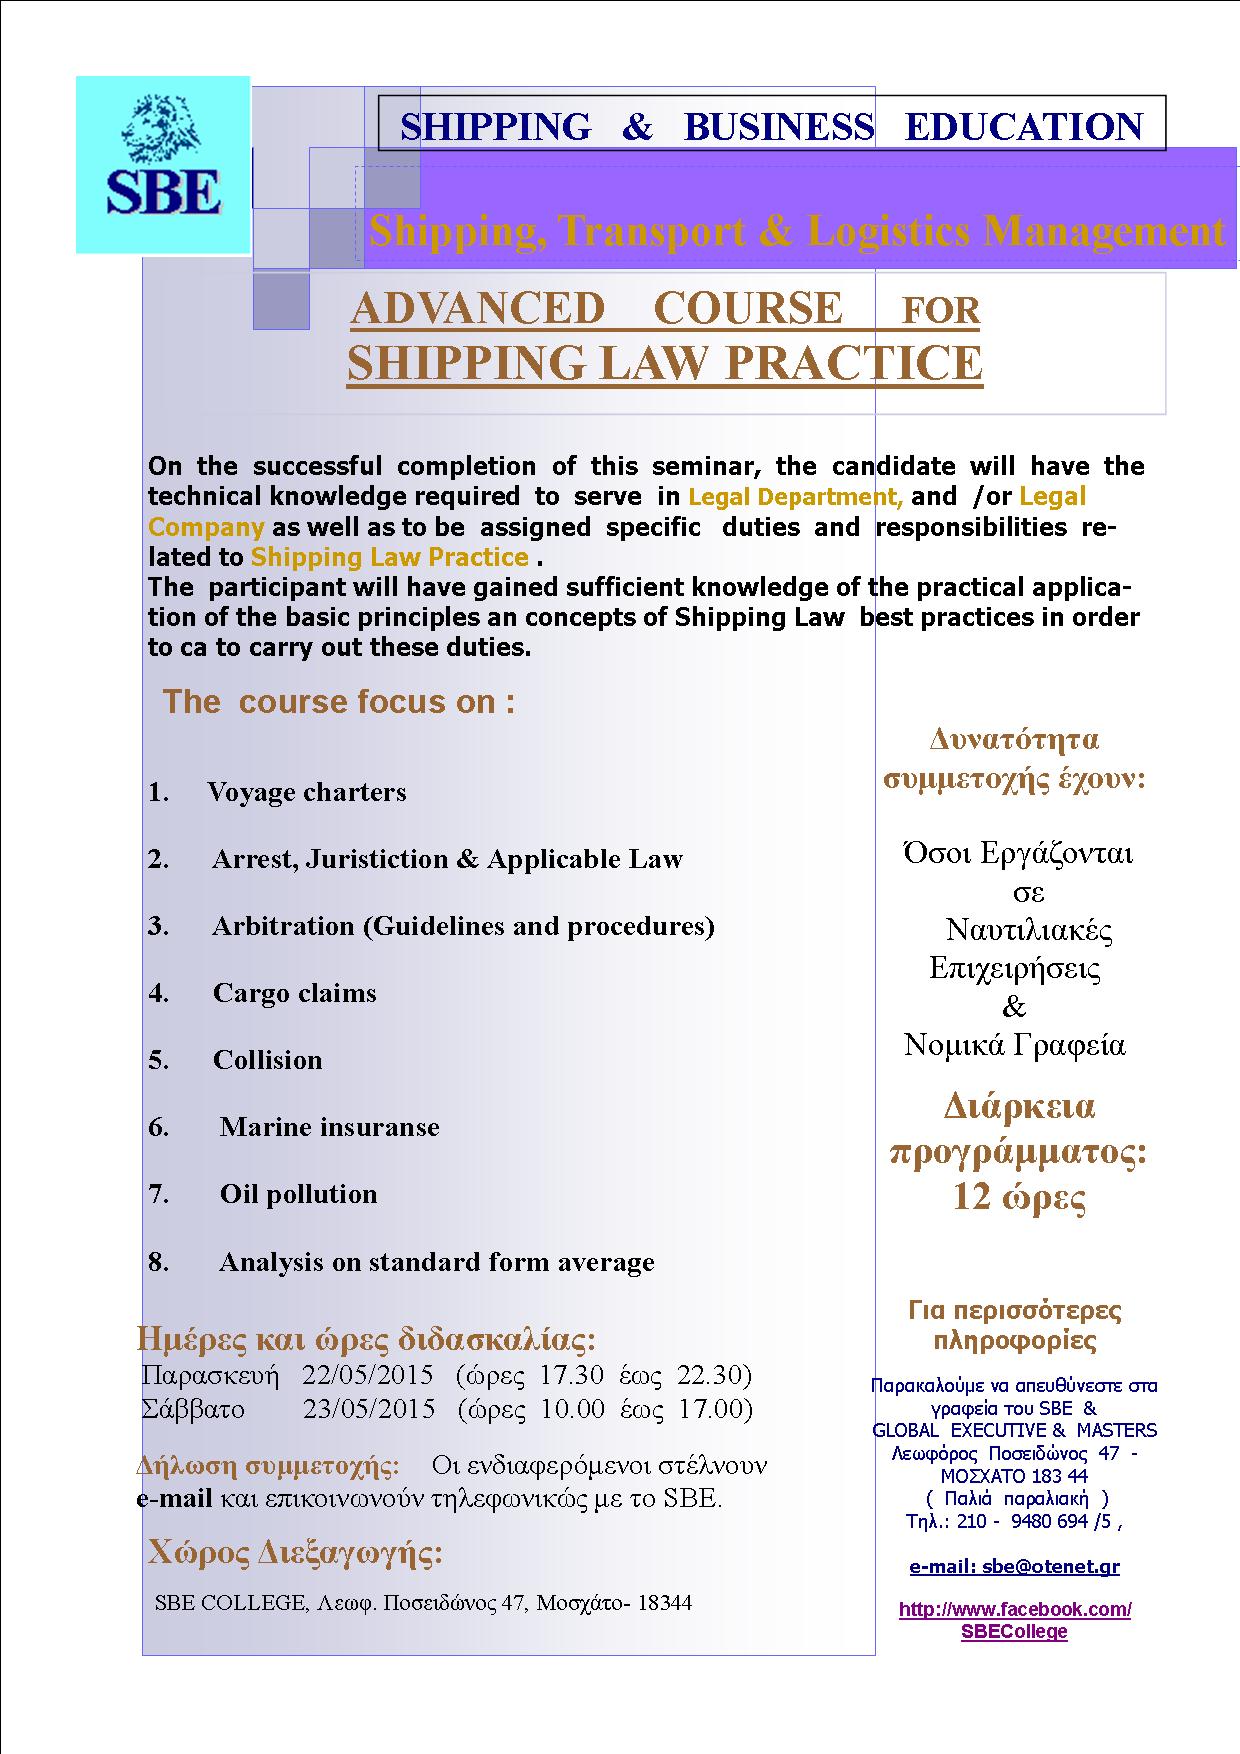 ADVANCED COURSE FOR MARINE INSURANCE PRACTICES